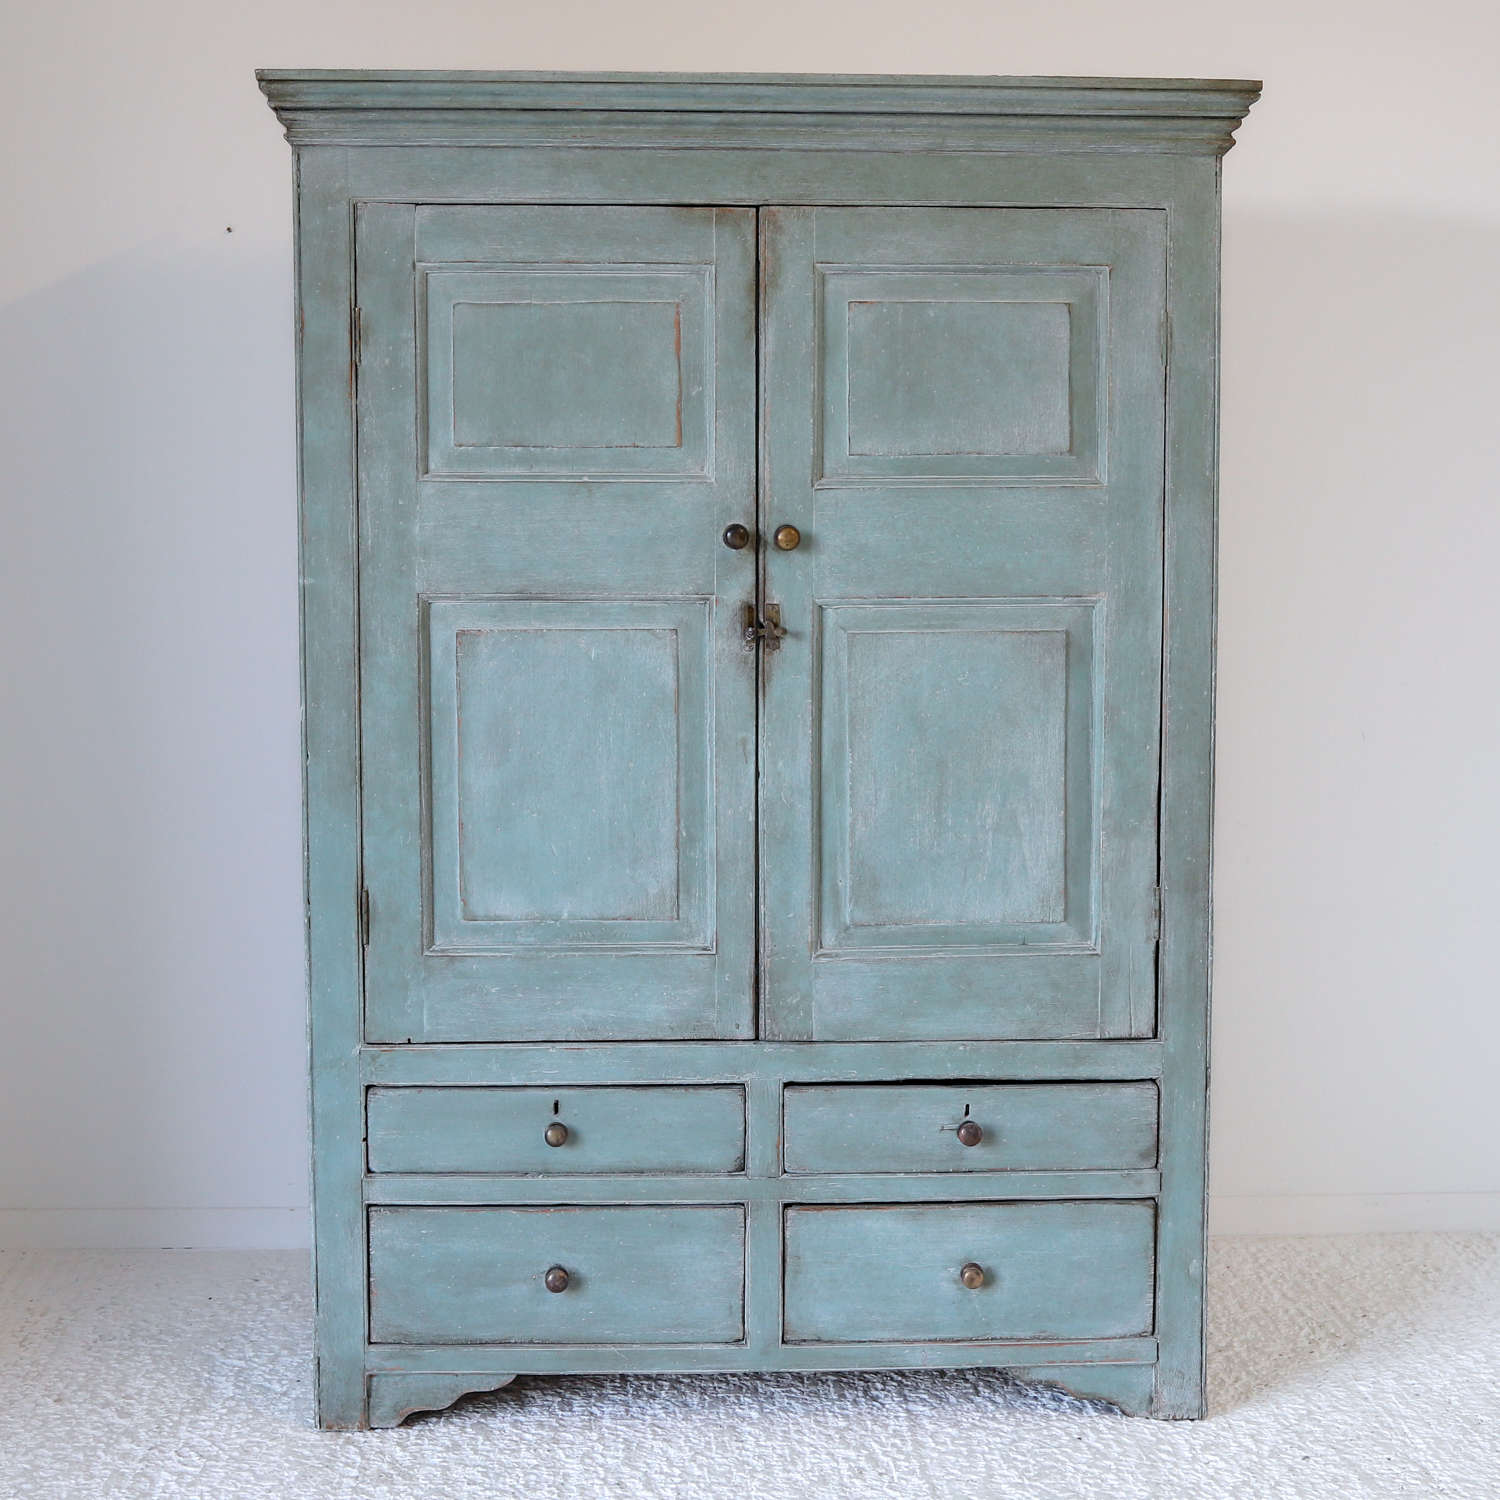 19th Century circa 1850 Housekeeper's Pantry Cabinet Painted Pine